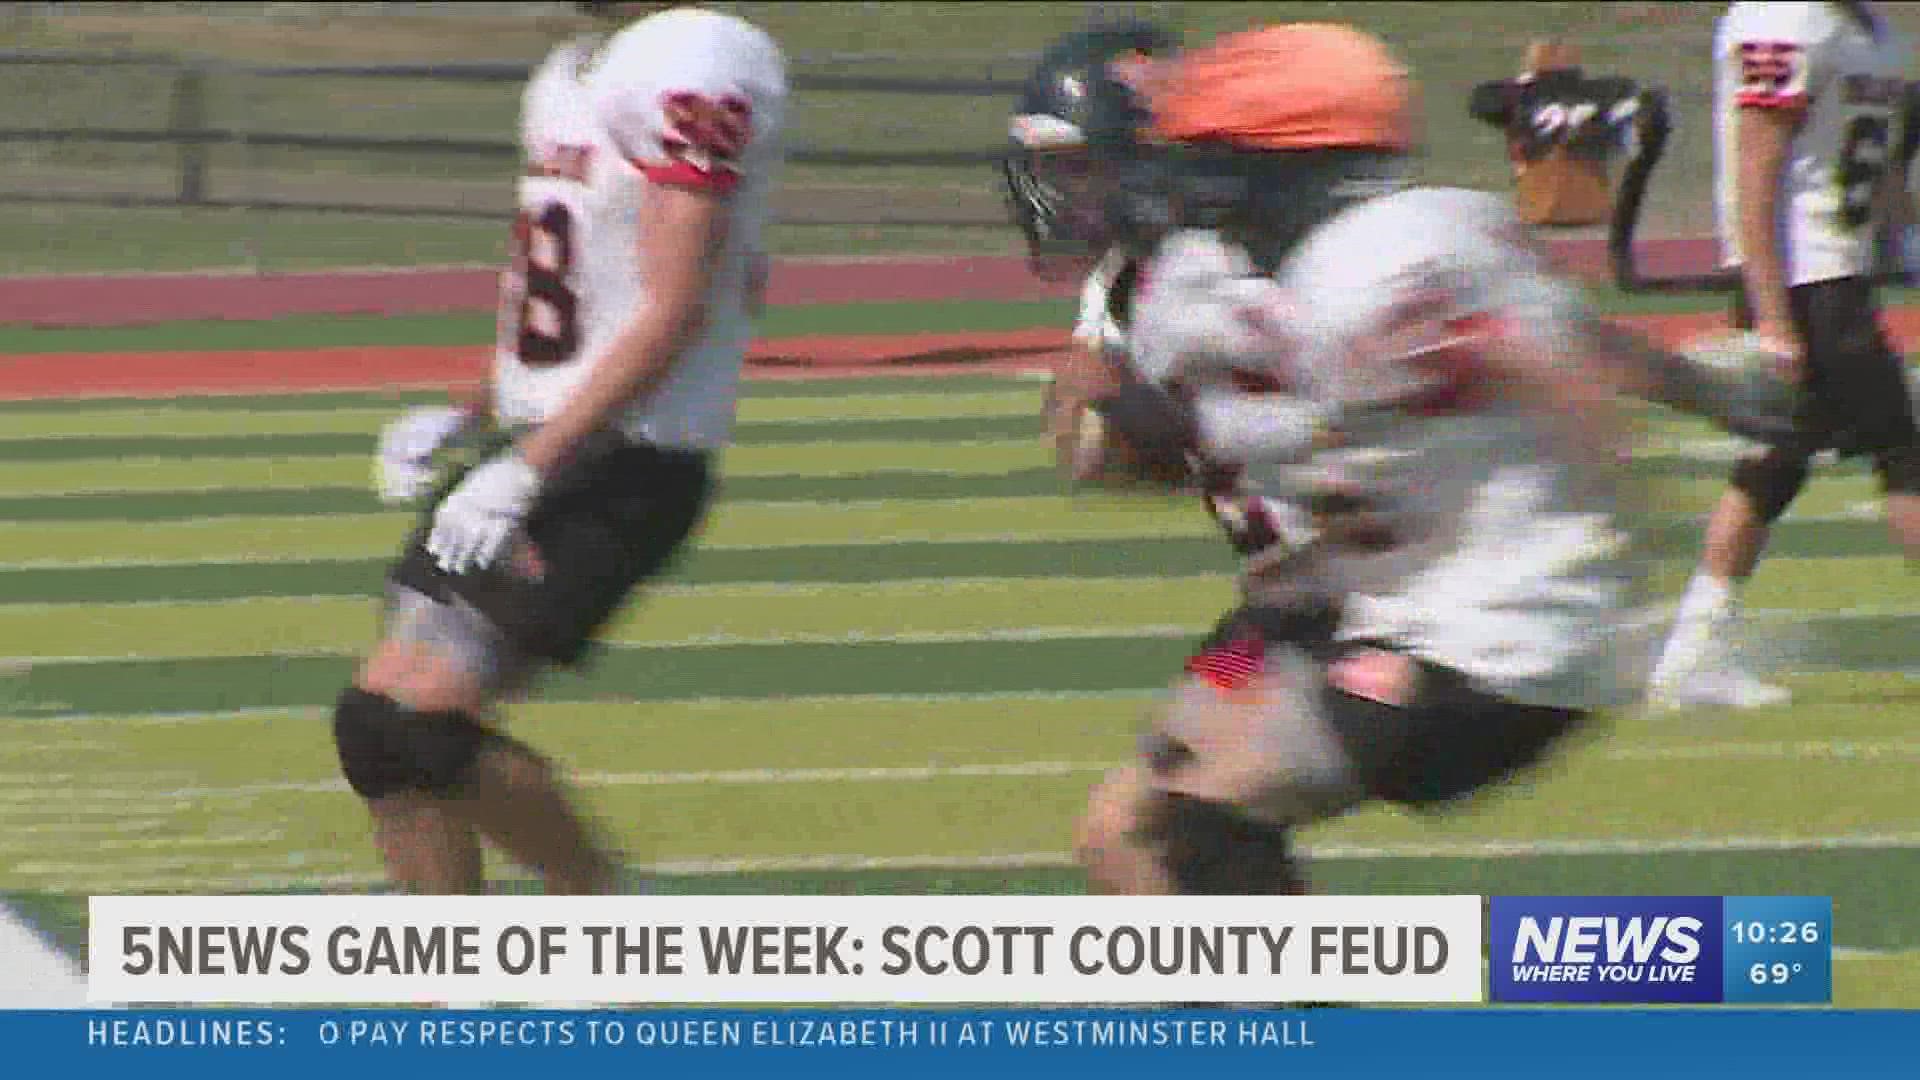 The Scott County Feud is back in 2021 for another chapter of this historic rivalry.